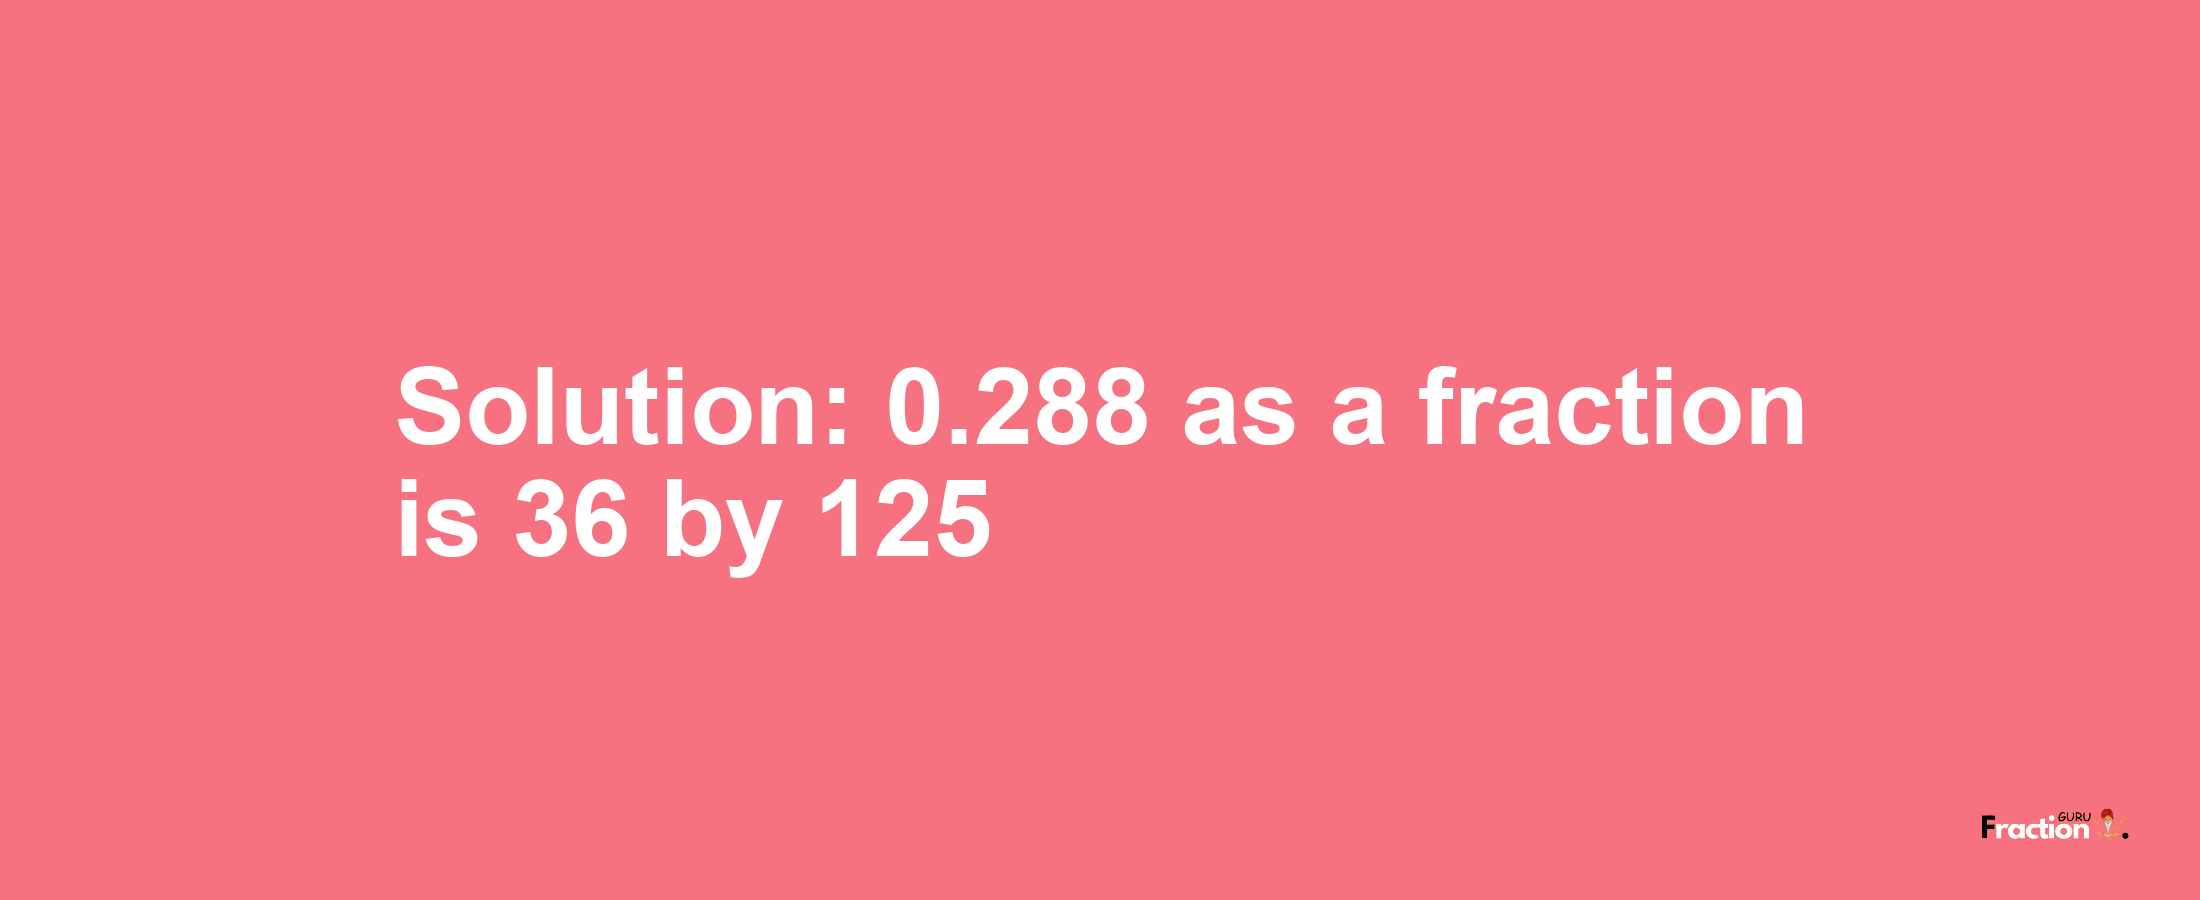 Solution:0.288 as a fraction is 36/125